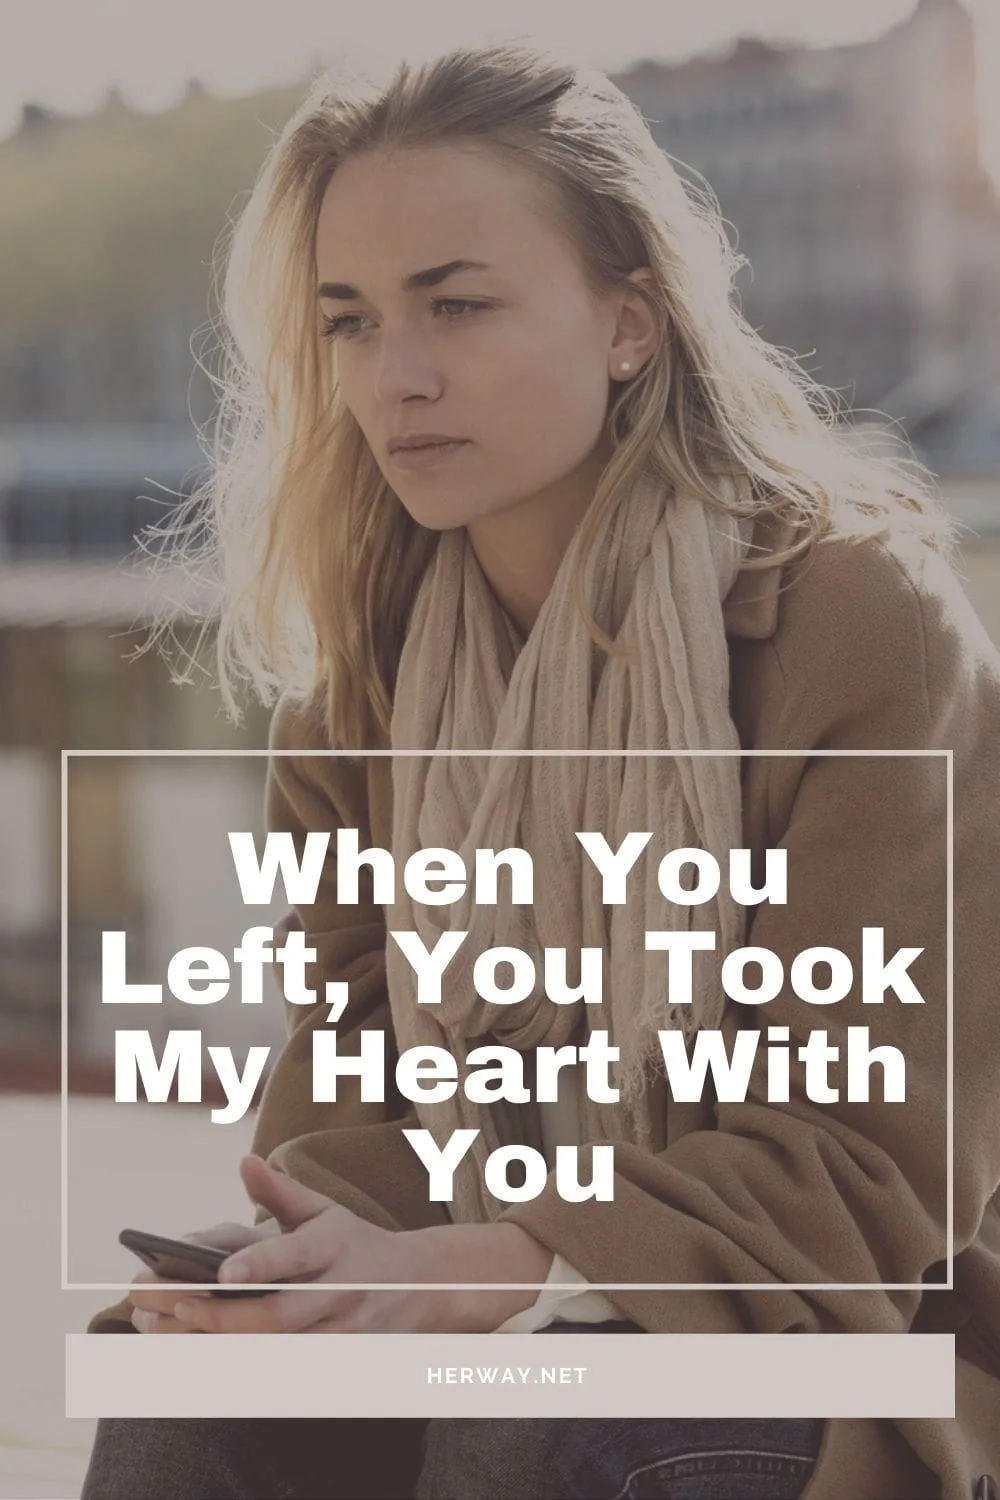 When You Left, You Took My Heart With You